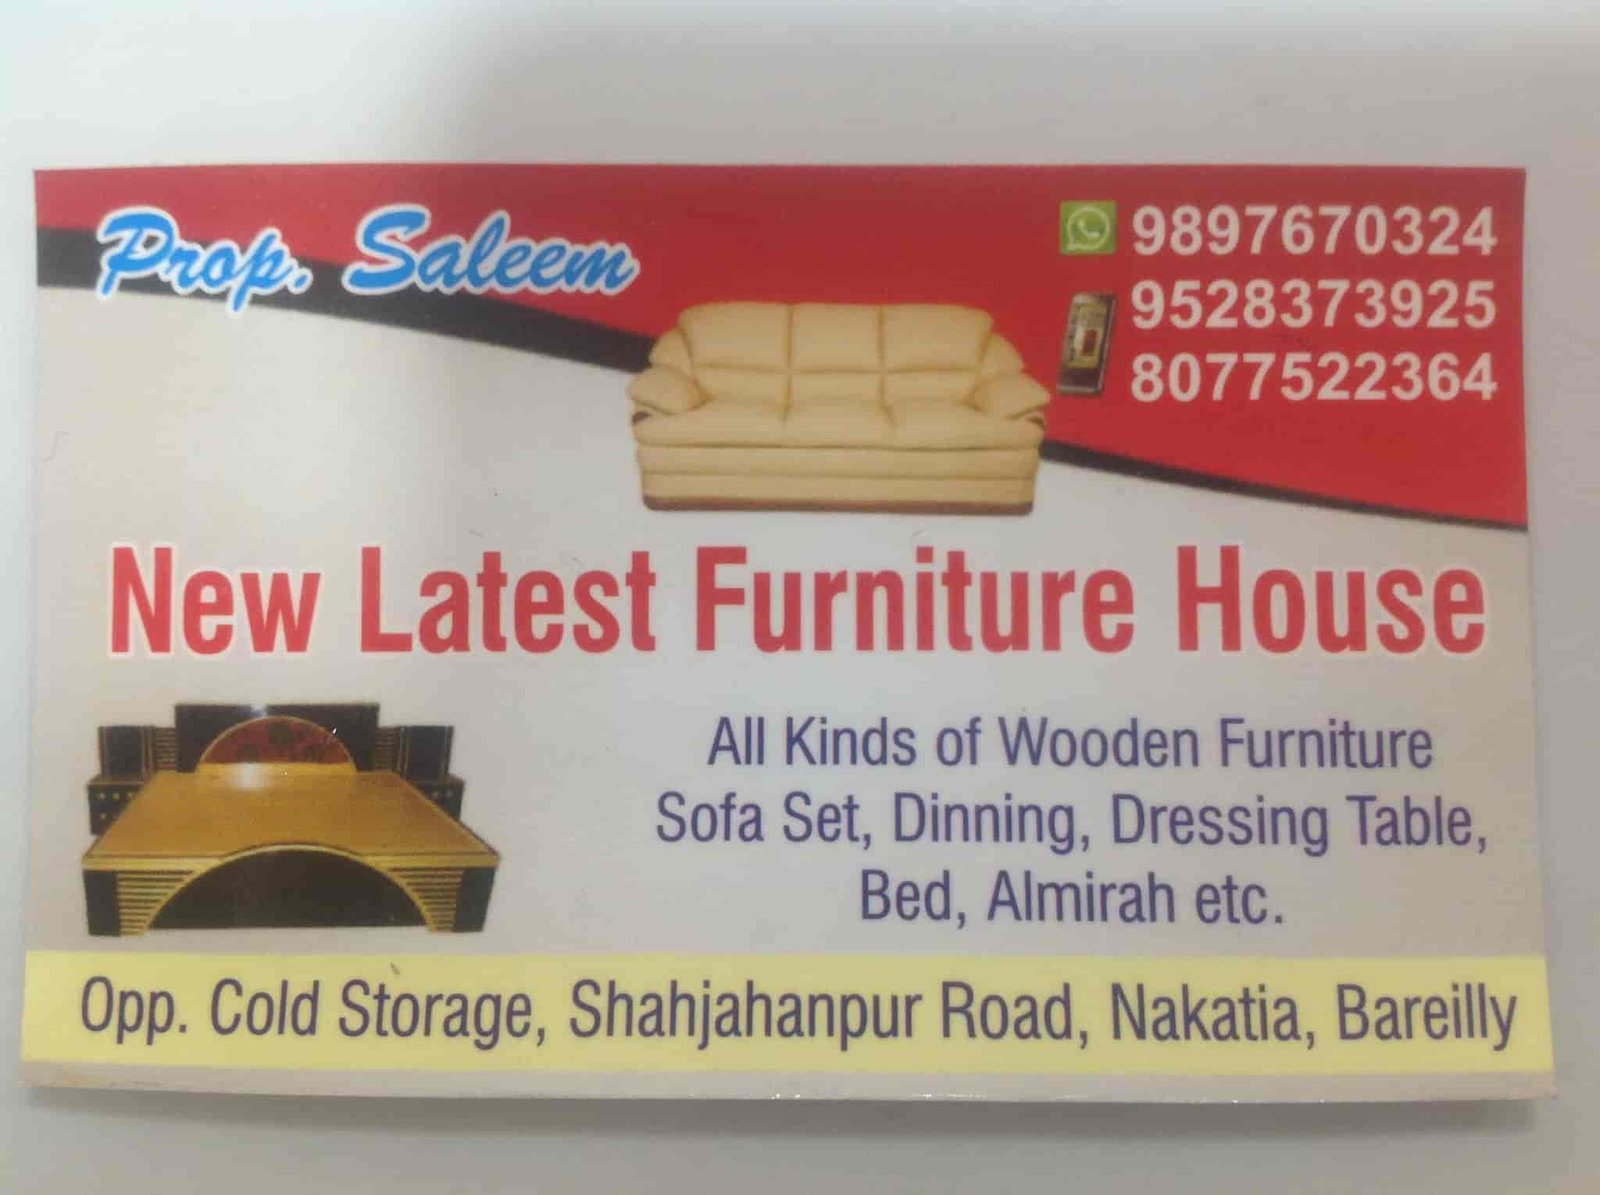 New Latest Furniture House